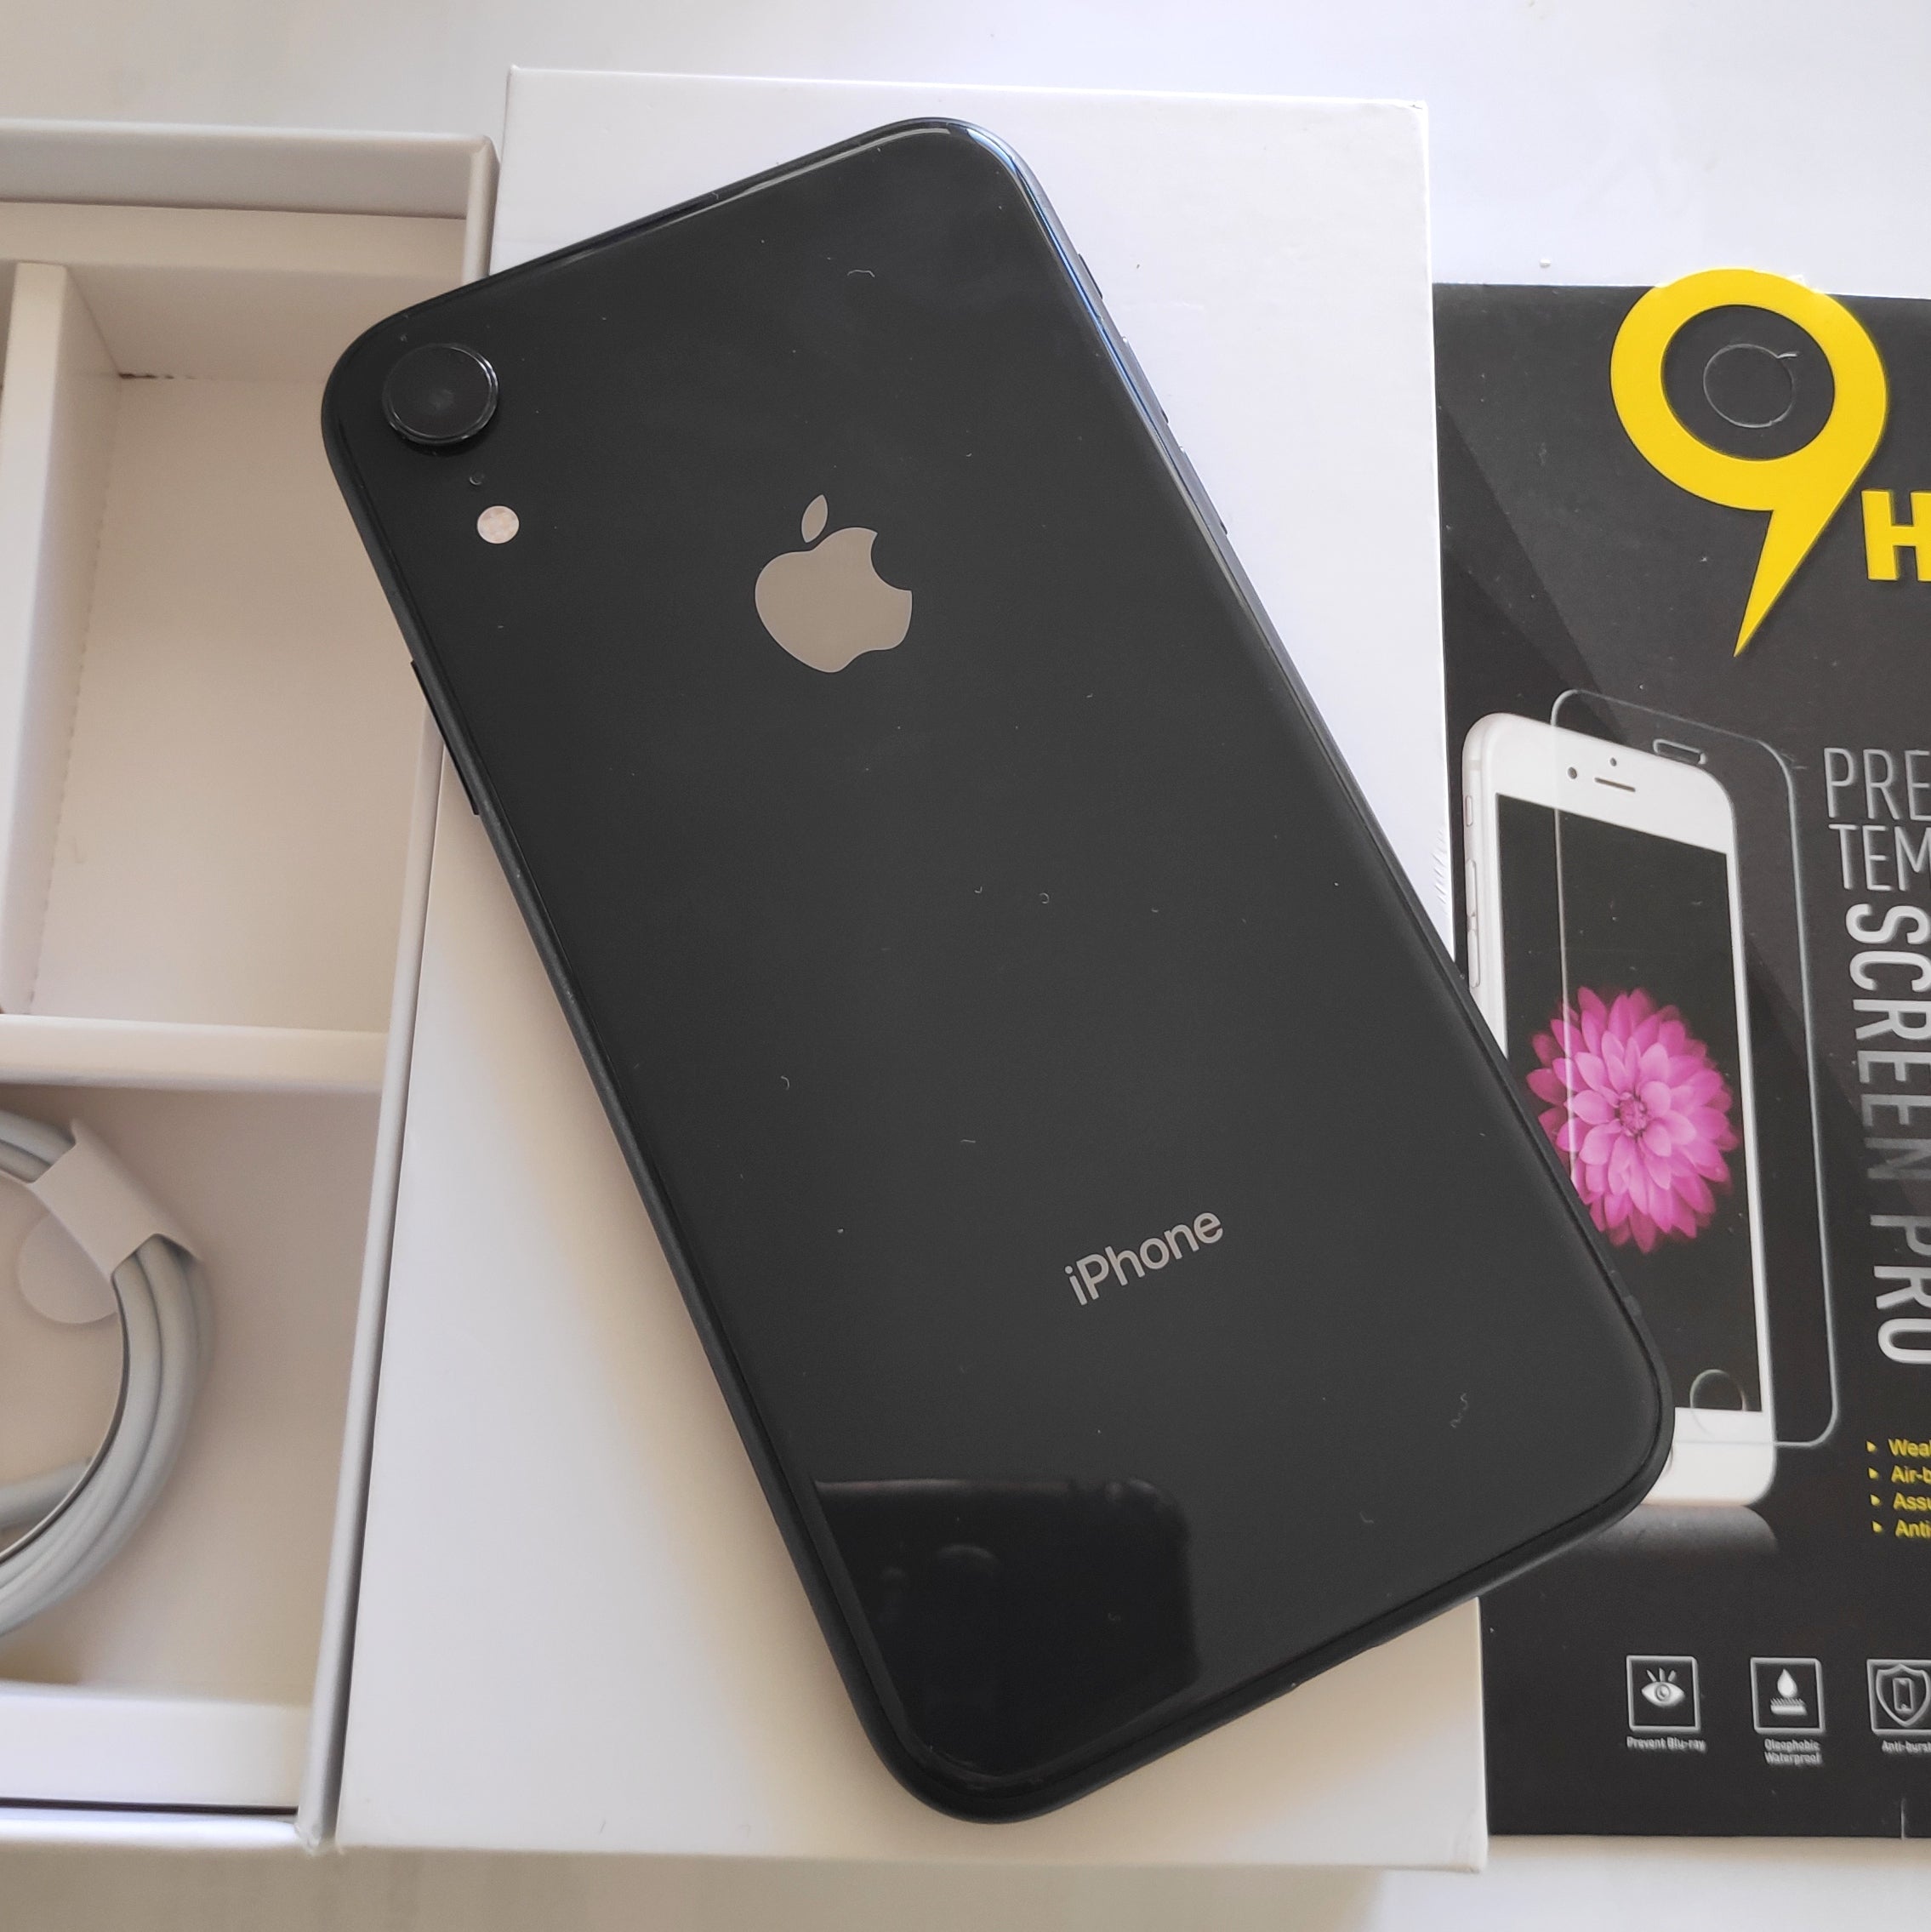 Apple iPhone XR 128GB Black - New Case, Glass Screen Protector & Shipping (Exc)